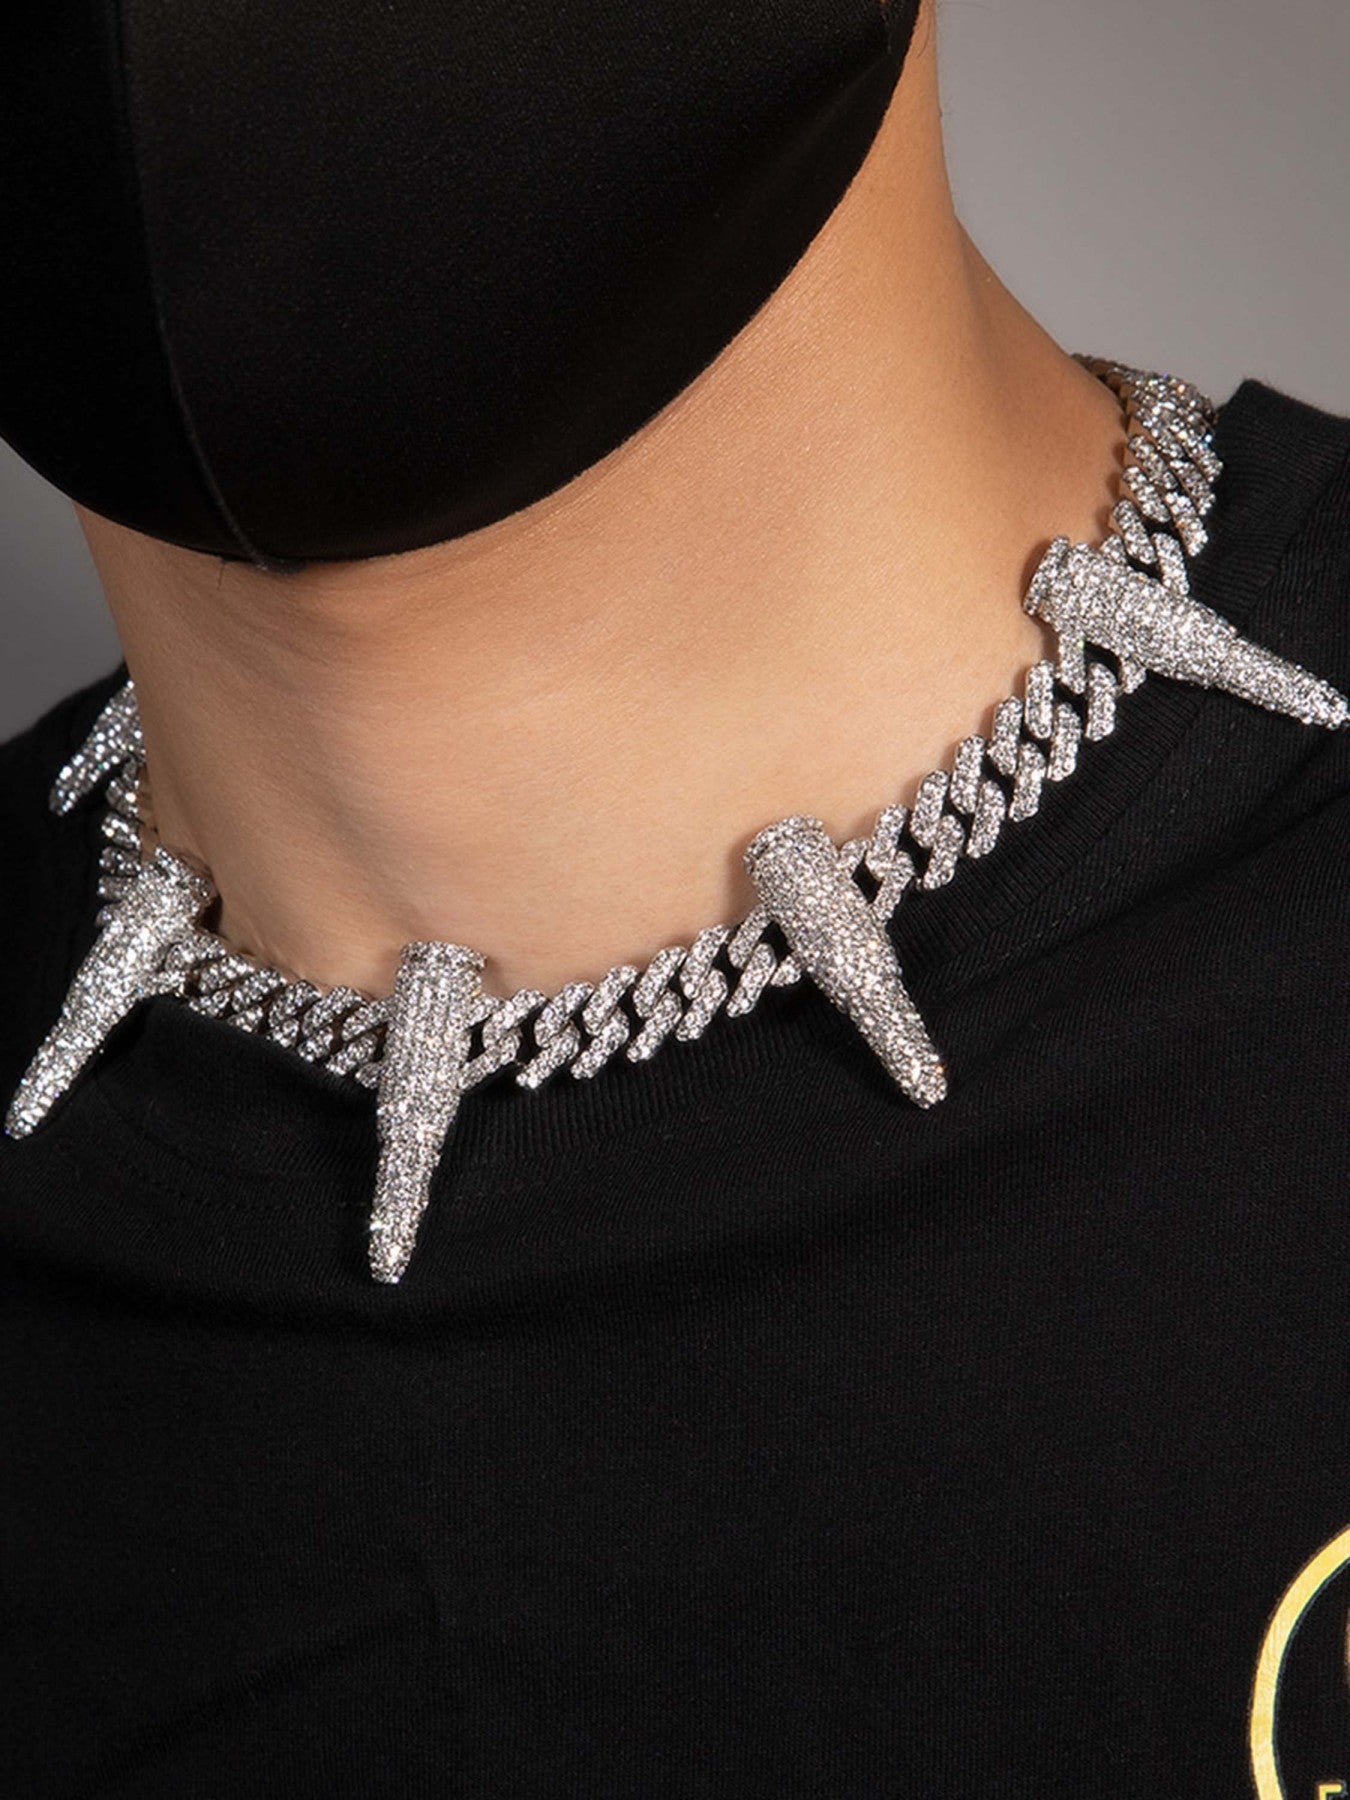 Thesupermade Hip Hop Bullet Masonry Necklace